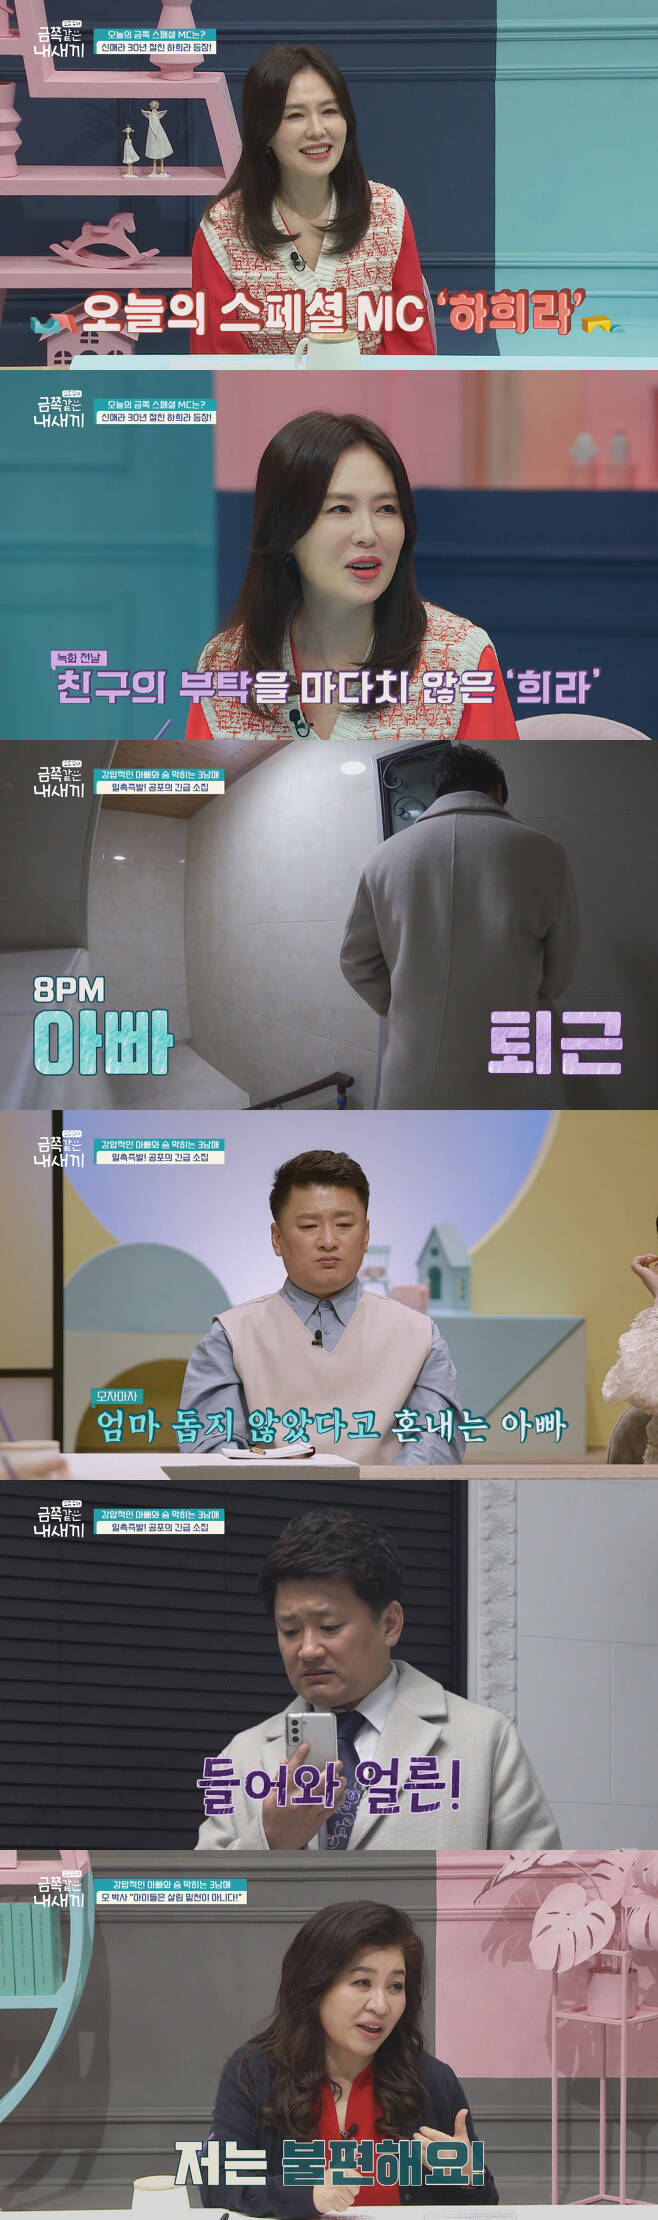 Actor Ha Hee-ra takes on Channel A Parenting these days - My Kid like the Golden on behalf of Shin Ae-ra.On the first day of the broadcast, the story of the controlling Father and the breathtaking three siblings is revealed.On this day, Ha Hee-ra appears as a special MC, and goes on a surprise support shot for 30-year-old friend Shin Ae-ra.Ha Hee-ra, who decided to appear without hesitation in a phone call from Shin Ae-ra, who was on the eve of the recording, said that he is a king fan who enjoys my golden child with his whole family, including his 20th daughter and husband Choi Soo-jong.In the pre-released video, Fathers daily life is seen after work: as soon as he enters the house, Father, who is looking for his third daughters whereabouts, calls and begins to locate the children.Father said to his daughter that he was going to karaoke, How many hours is it?I ordered him to come home immediately, and he also called his 20-year-old first son who was out there and said, Come in and help me work! In the end, Father tells the children who have come home because they can not get the rant, Come in before 7 oclock.Fathers coercive attitude without a concession, the third, he says, is breathtaking and tears. What are you breathing?The third thing to say is, You are trying to lock me up, and Father is disturbed by my happiness. At this time, Oh Eun Young, who urgently stopped the video, shows a picture of the tablet carefully to Father, saying, I will show it to my father separately and explain it.Fader cant hide his bewildering look at Oh Eun Youngs question: Youve seen it for the first time?